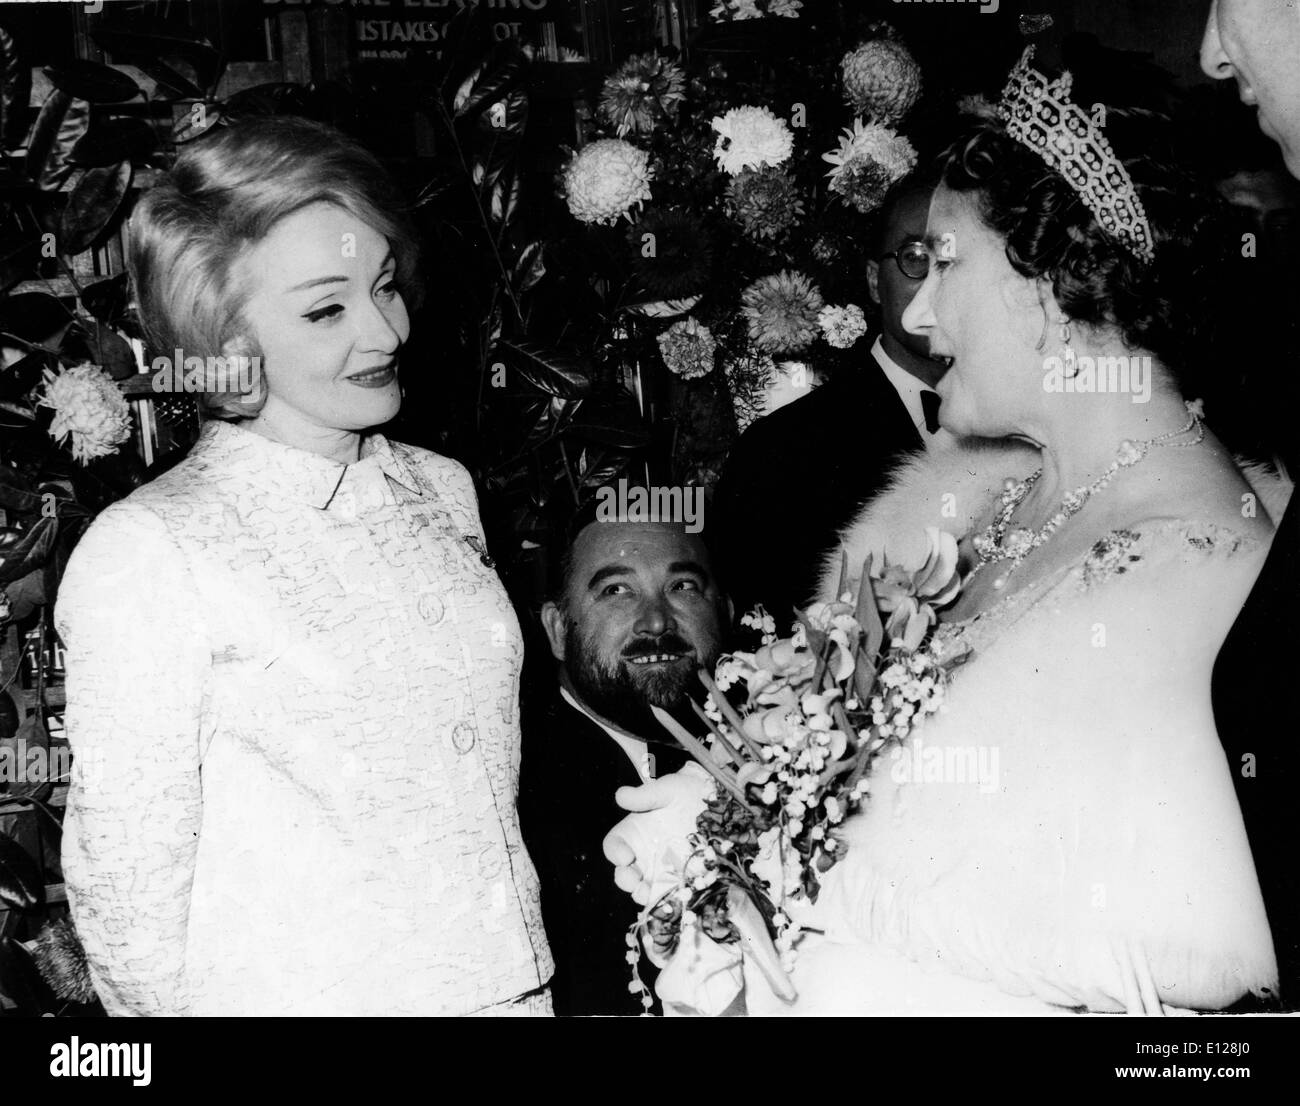 Apr 01, 2009 - London, England, United Kingdom - MARLENE DIETRICH (27 December 1901 Ð 6 May 1992) was a German-born American actress and singer. (Credit Image: KEYSTONE Pictures USA/ZUMAPRESS.com) Stock Photo